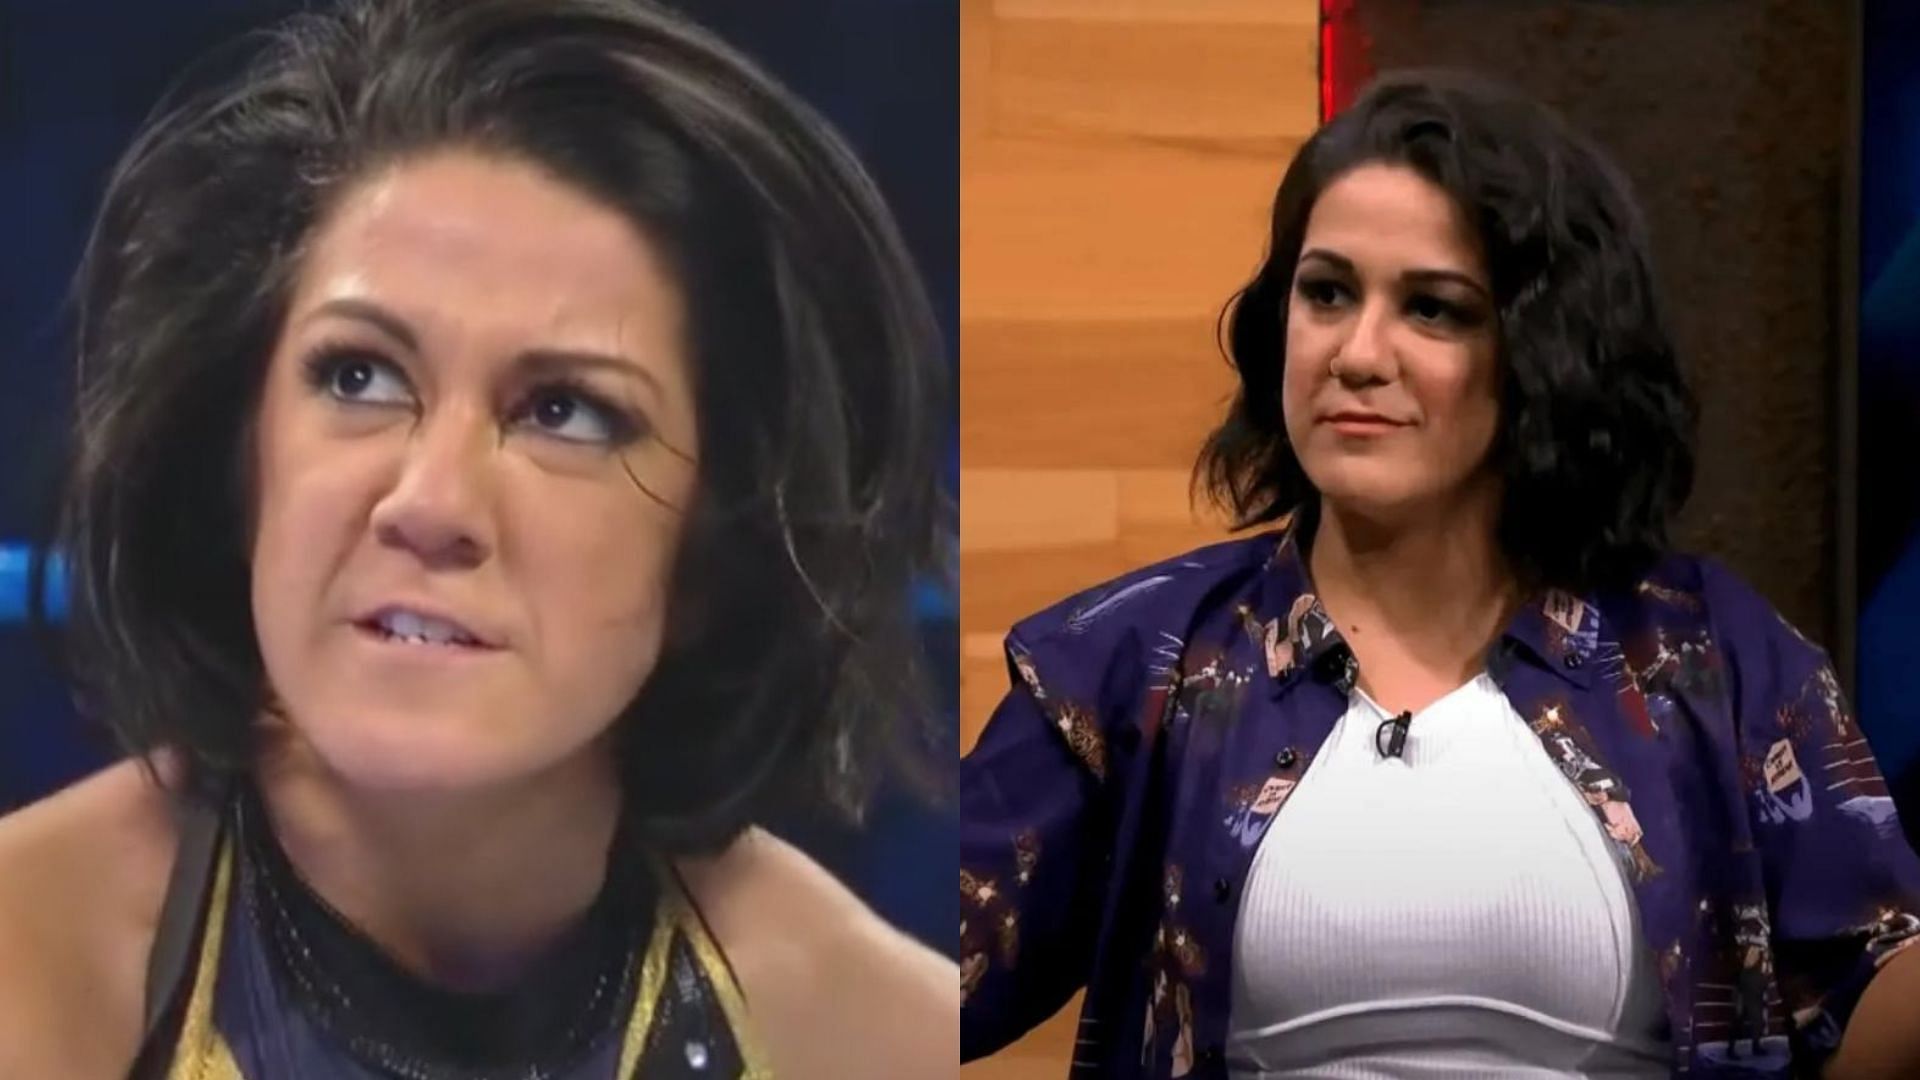 Bayley recently engaged in a social media back-and-forth with a popular WWE personality